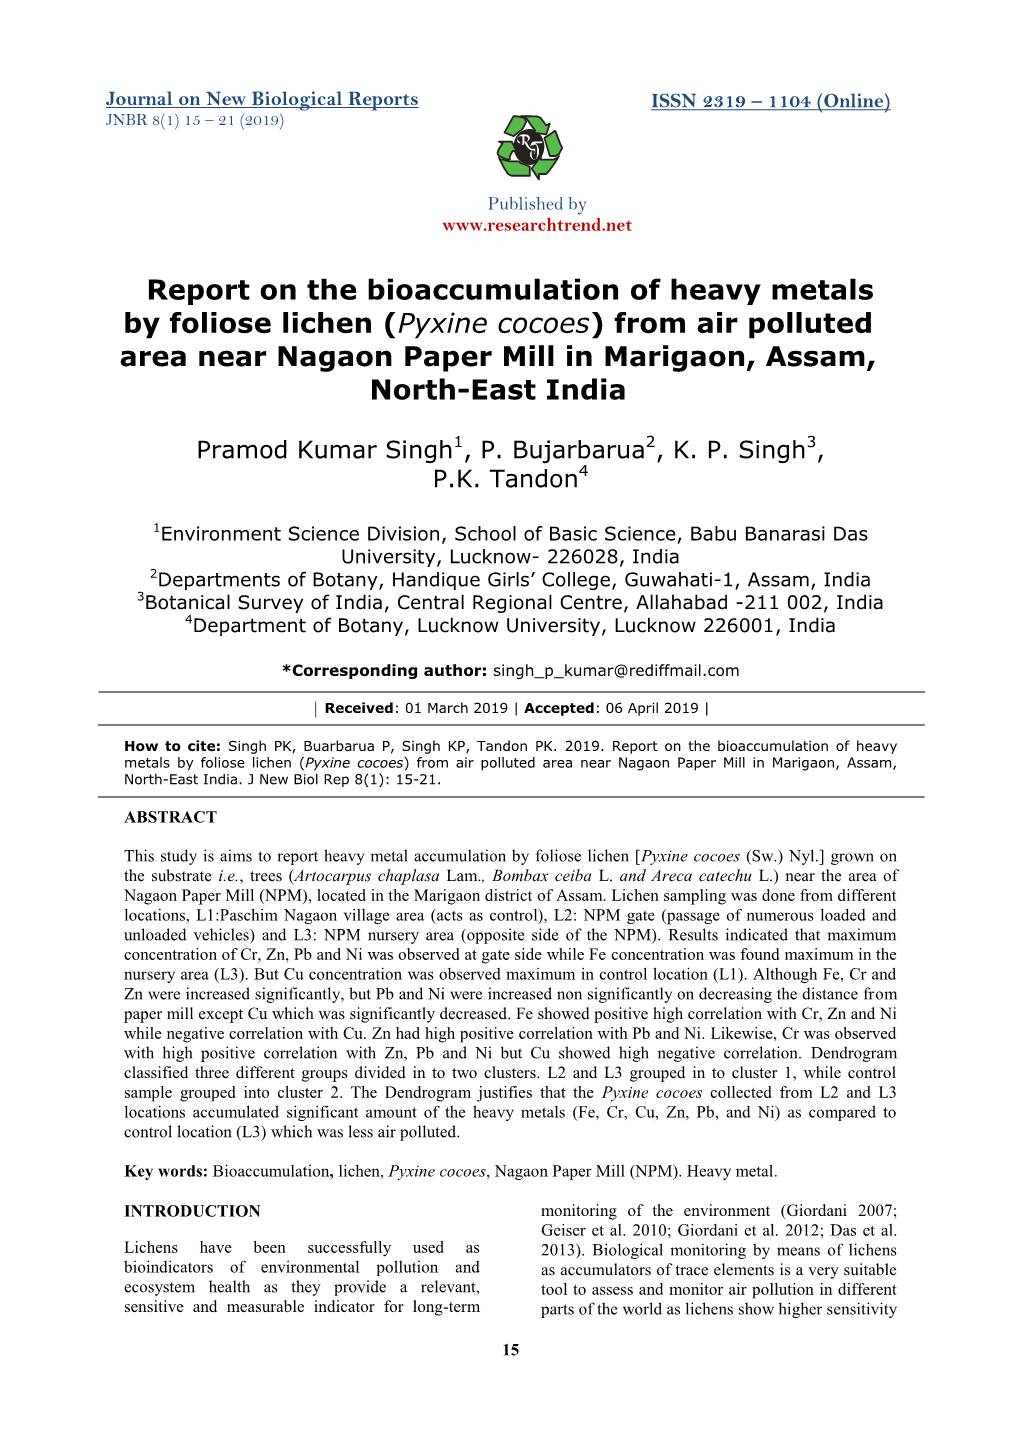 Report on the Bioaccumulation of Heavy Metals by Foliose Lichen (Pyxine Cocoes) from Air Polluted Area Near Nagaon Paper Mill in Marigaon, Assam, North-East India